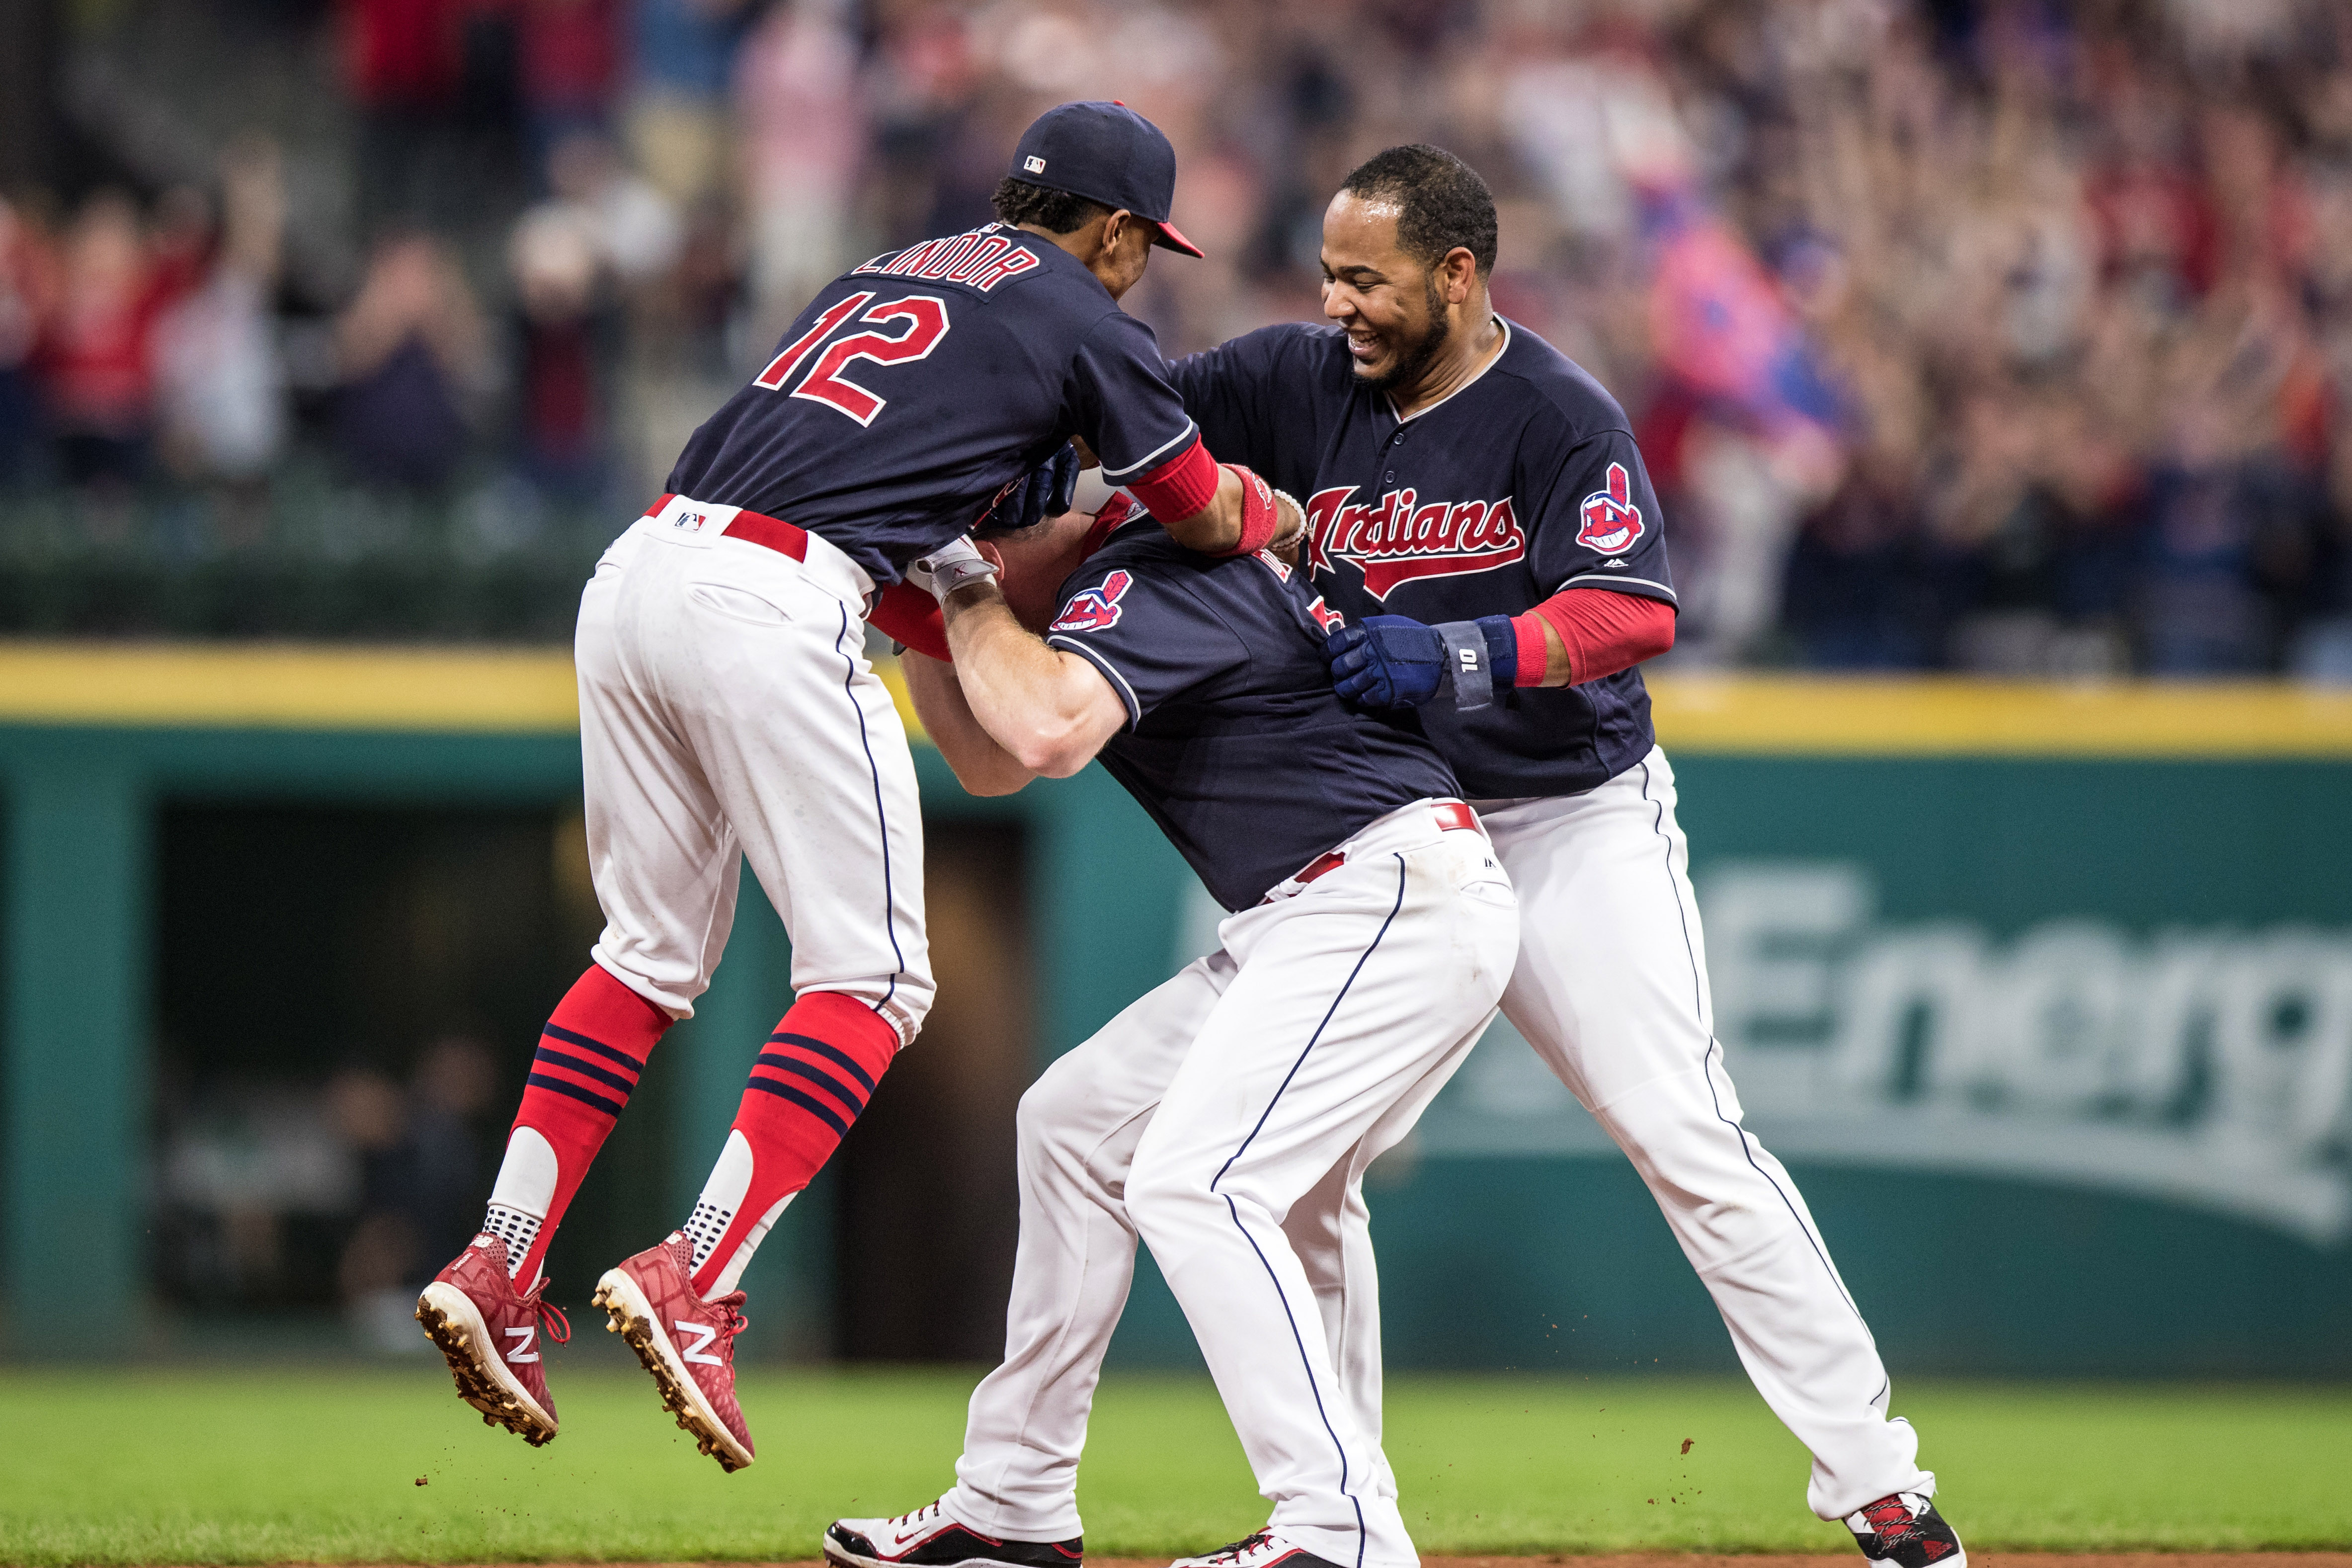 Ho-Hum: The Cleveland Indians Make It 21 Wins in a Row - The New